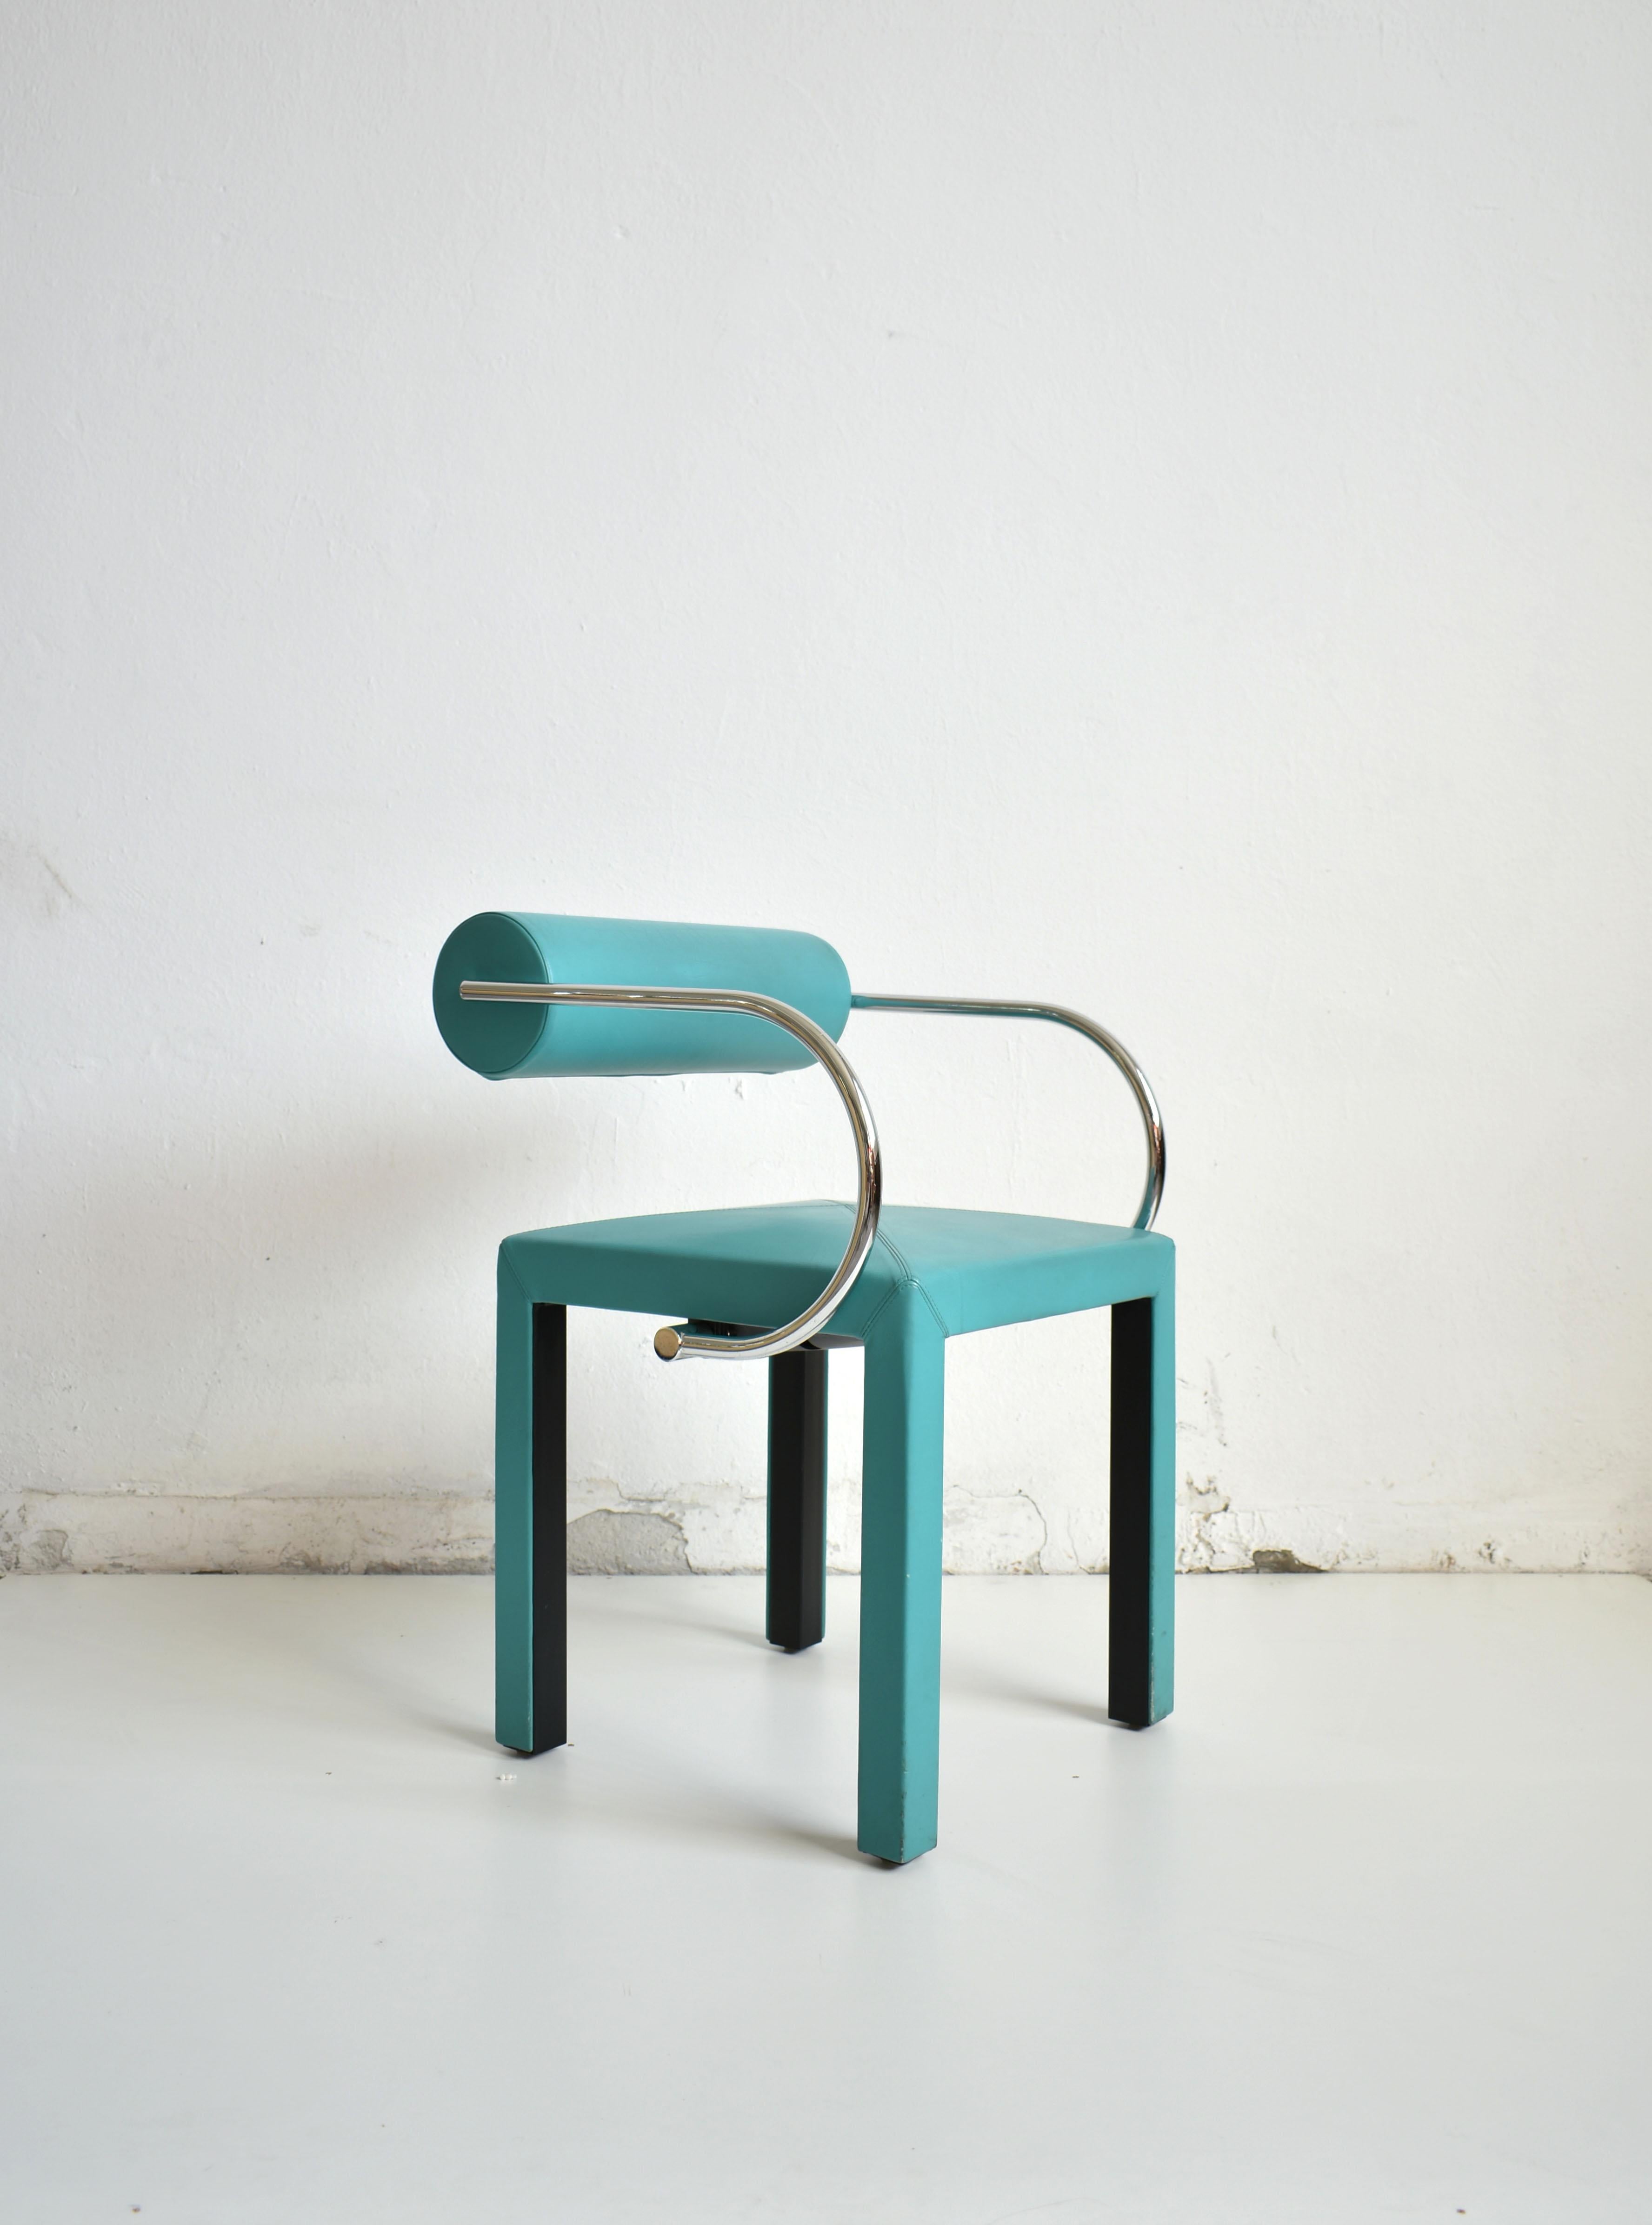 Leather 'Arconda' chair from Arcadia series
Legs, seat and the backrest are upholstered in soft, top-quality turquoise colour Italian leather. The armrest is made of chrome-plated metal. Producer's mark is visible on the bottom side of the